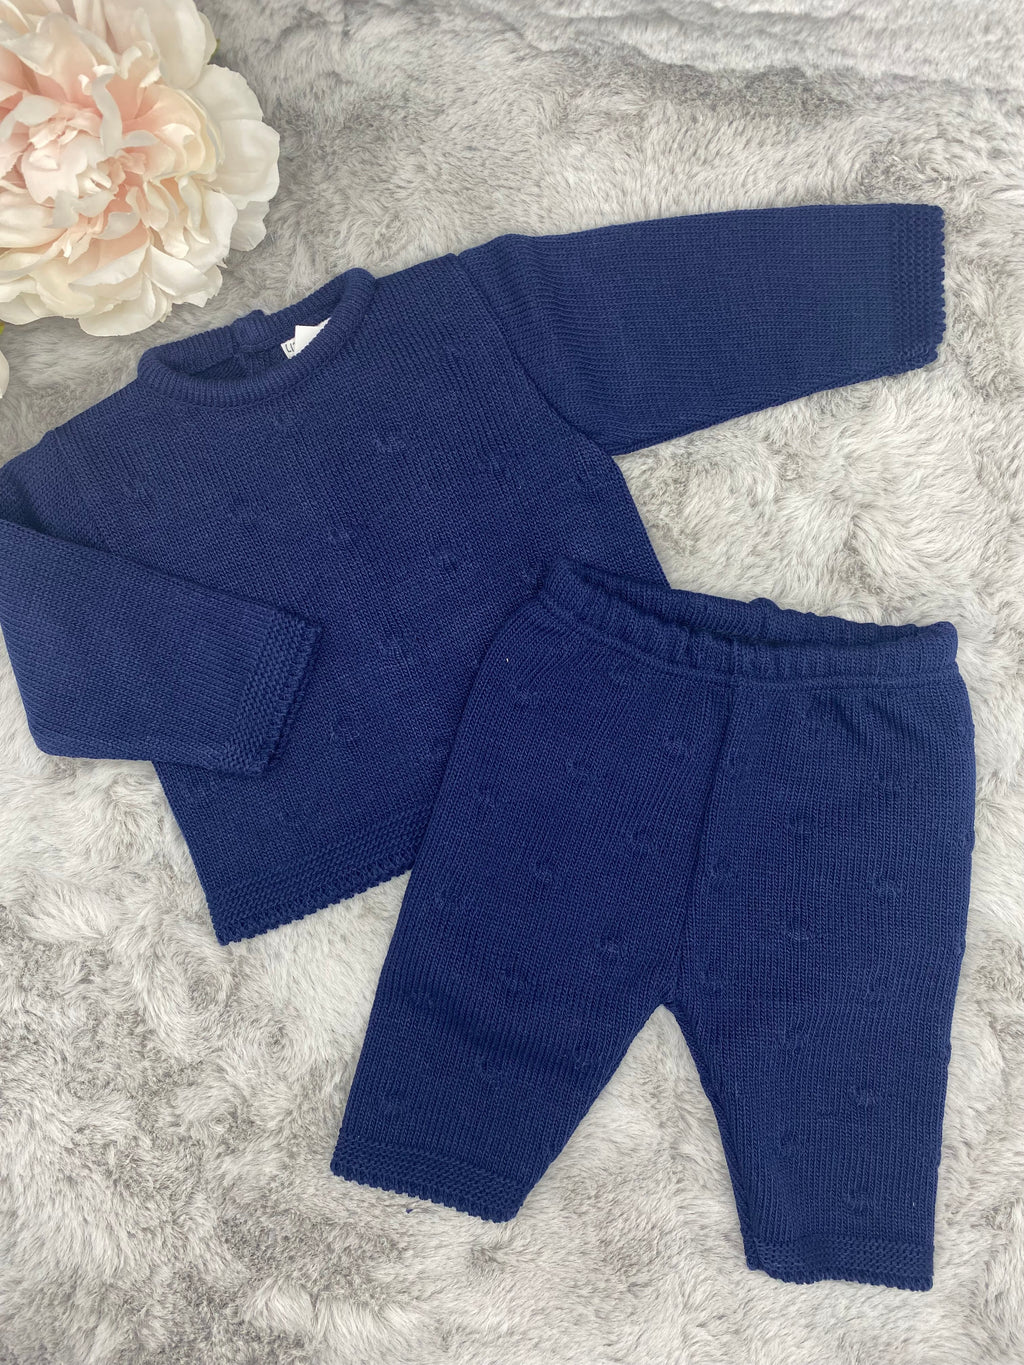 Navy knitted 2 piece set